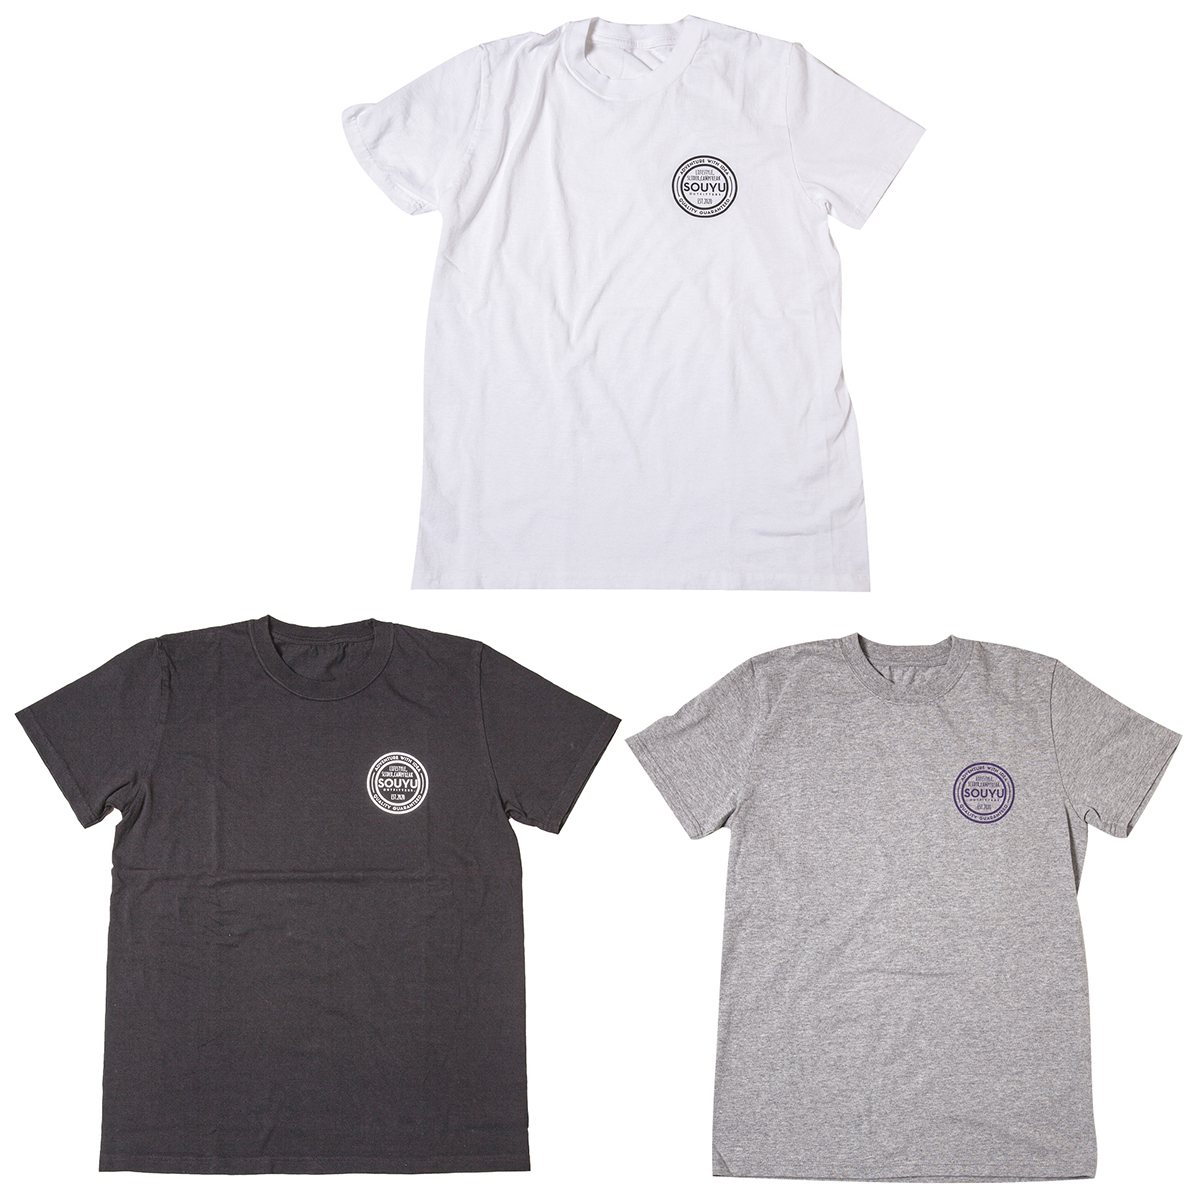 STD LOGO TEE スタンダードロゴ T シャツ Number : s20-so-10C Fabric : Cotton 100% Size : XS, S, M, L, XL Color:White, Black, Gray Heather Price : ¥4,800